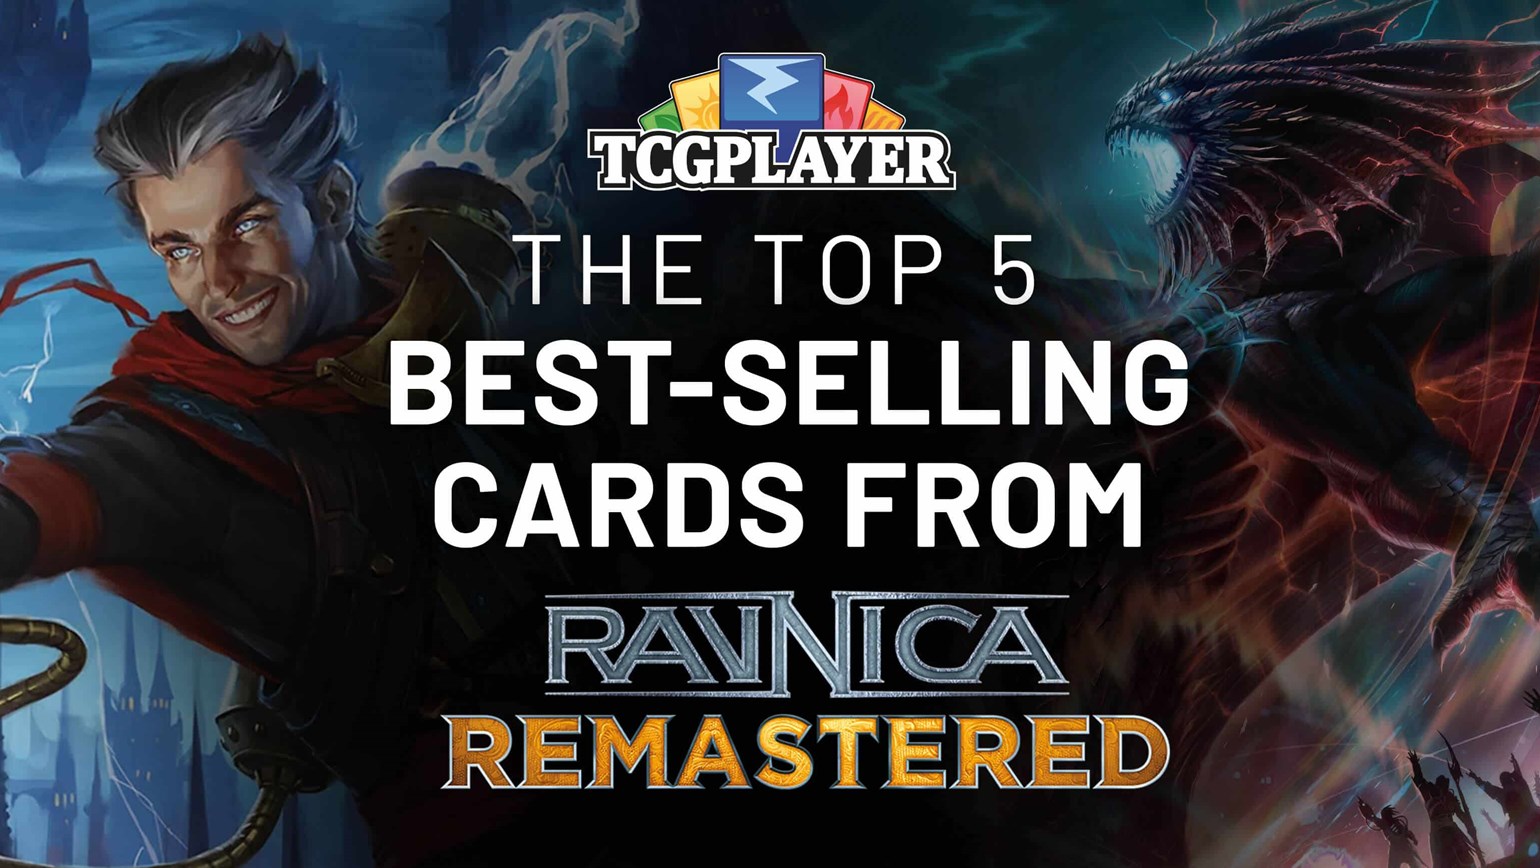 The Top 5 Best-Selling Cards of Ravnica Remastered